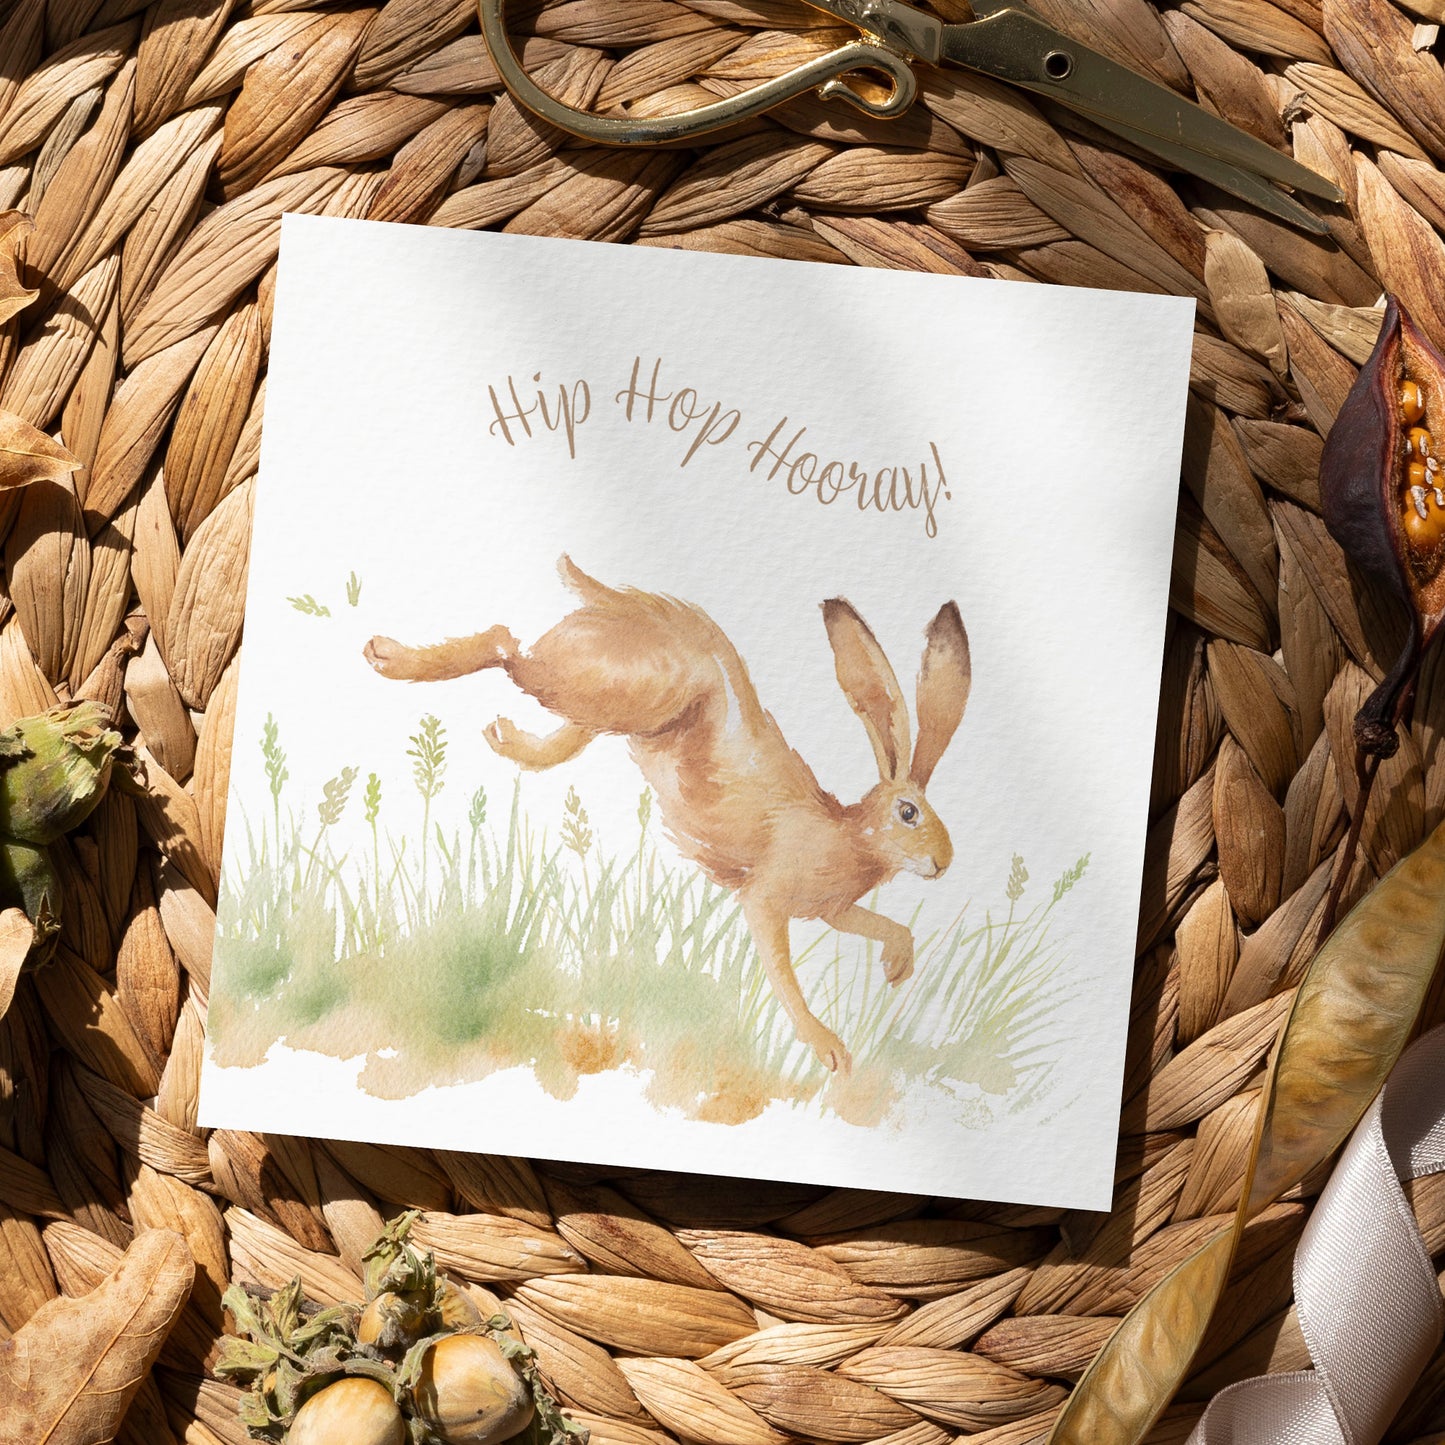 A greetings card laid flat on a table surrounded by gift wrapping items including scissors and ribbon. The card reads Hip Hop Hooray in brown text above a leaping hare in a watercolour style.